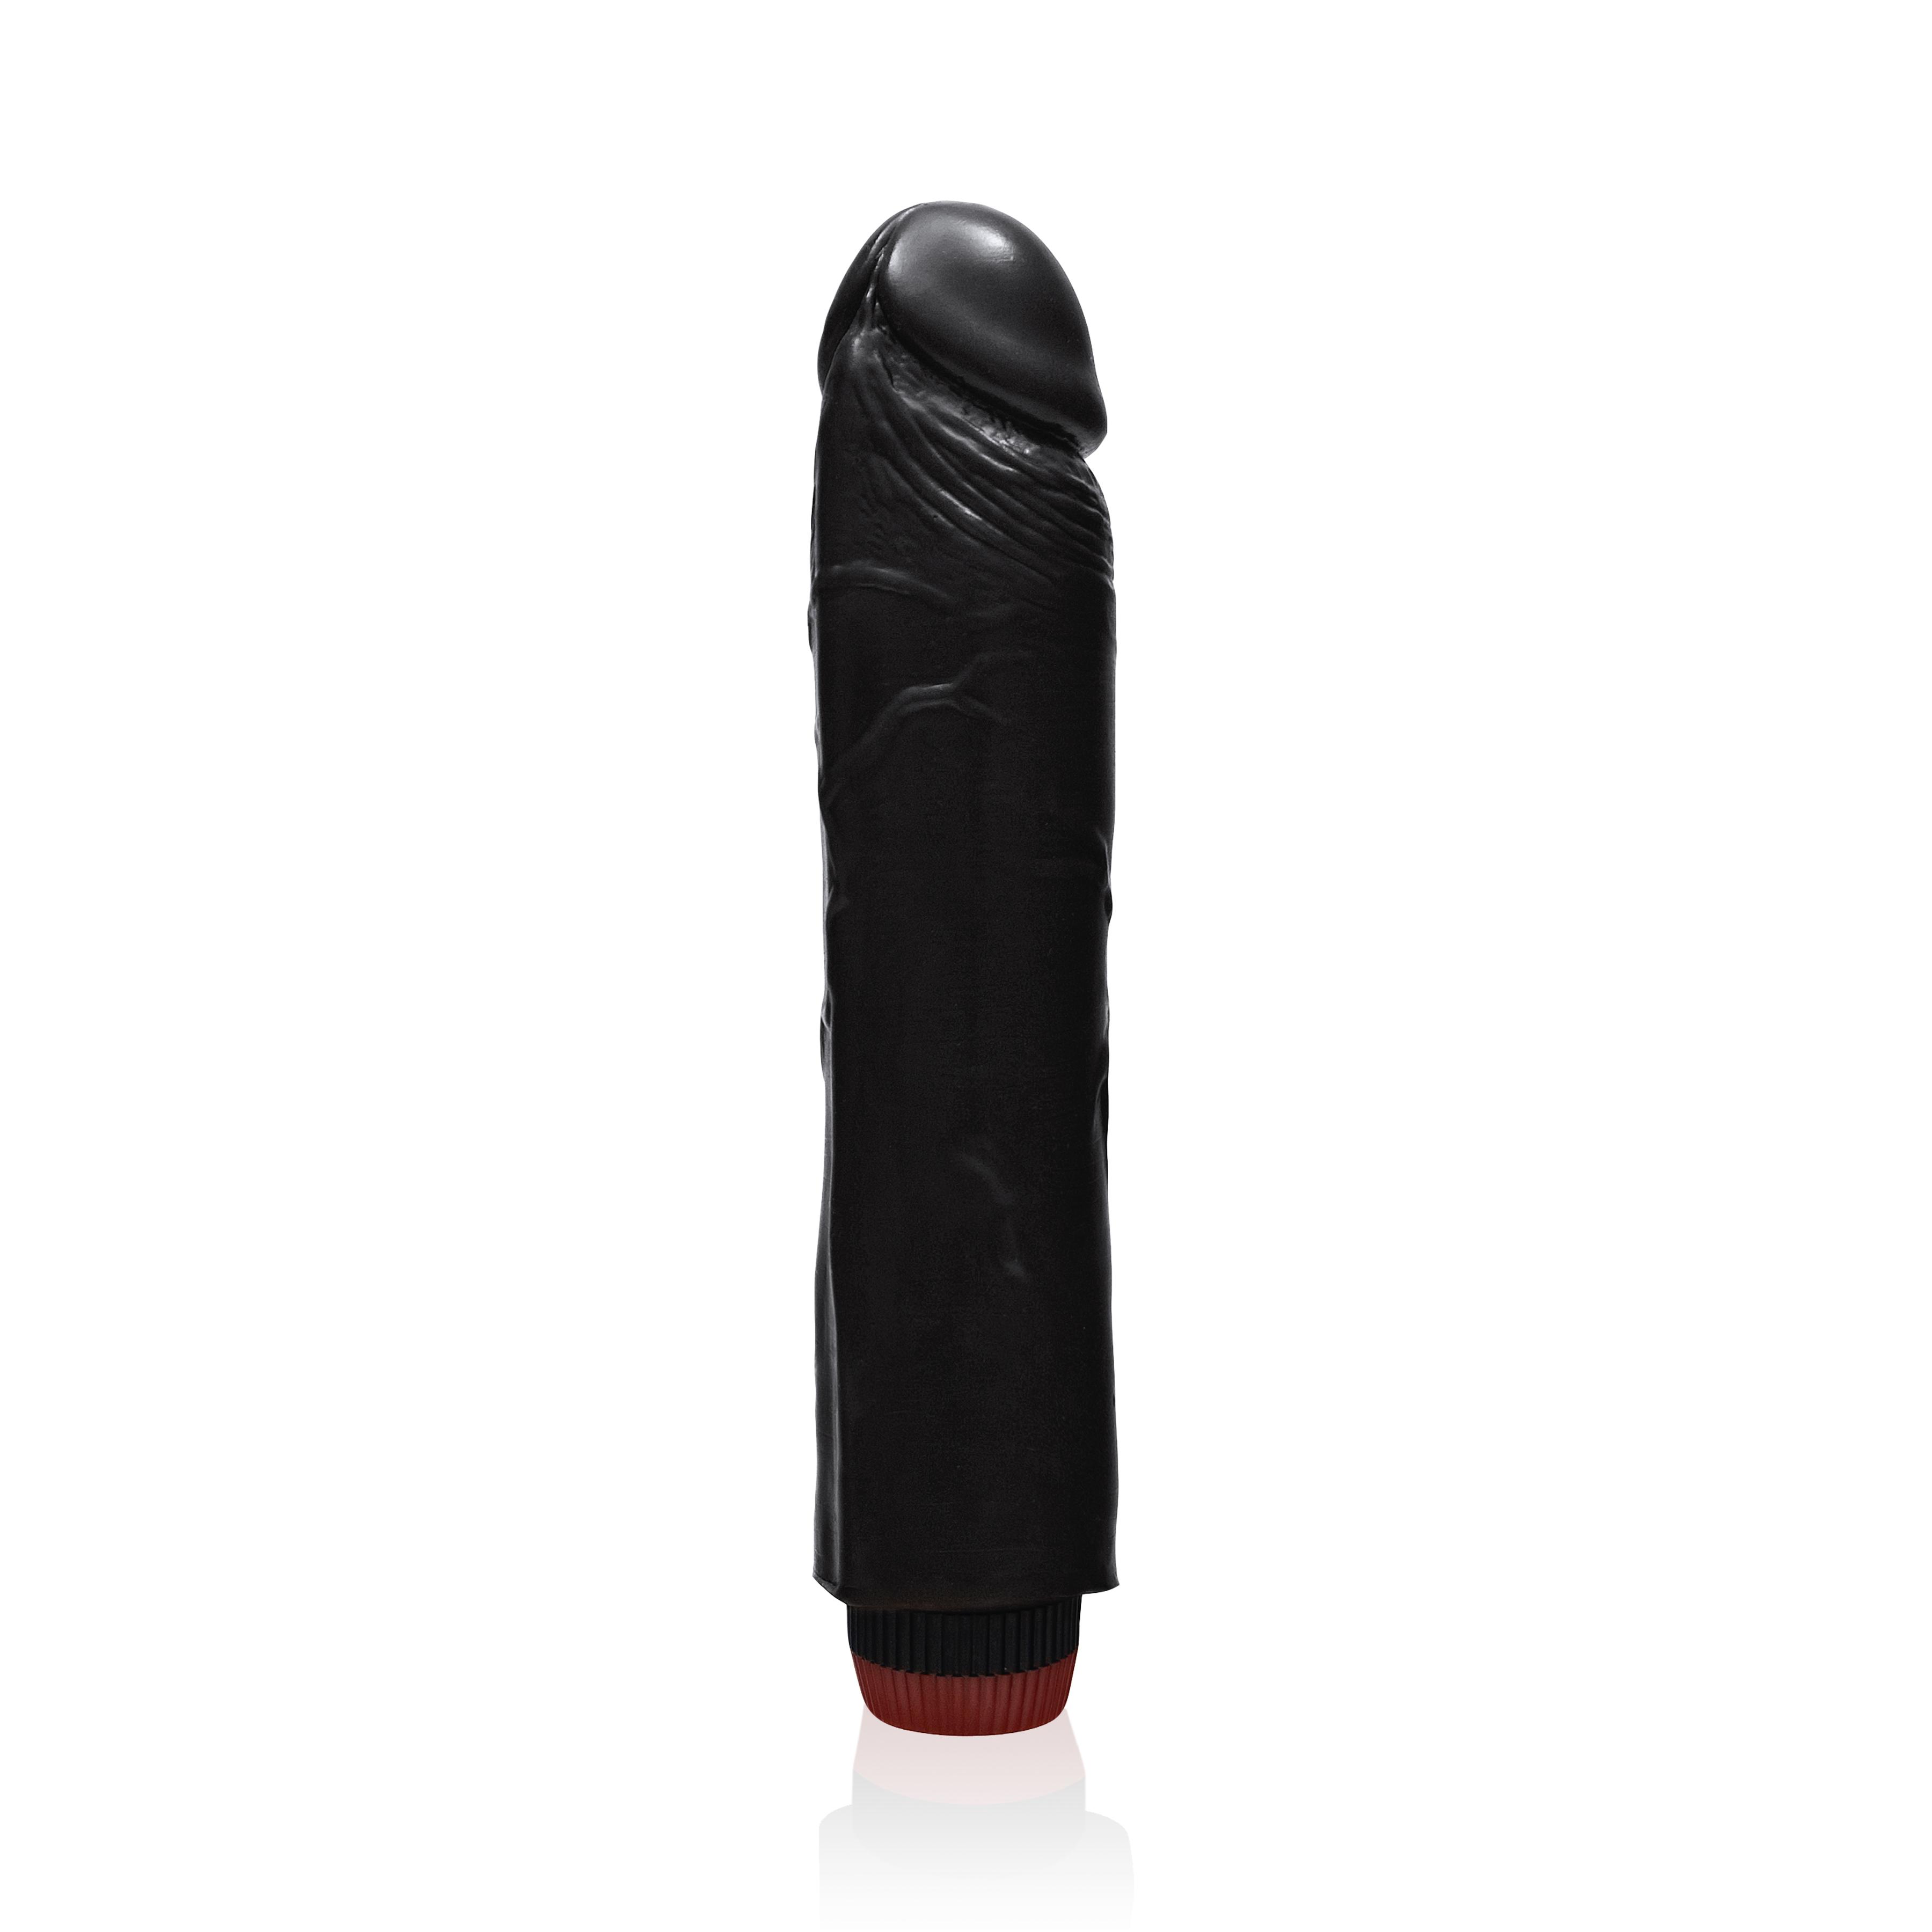 SI IGNITE Cock Dong with Vibration, Black, 23 cm